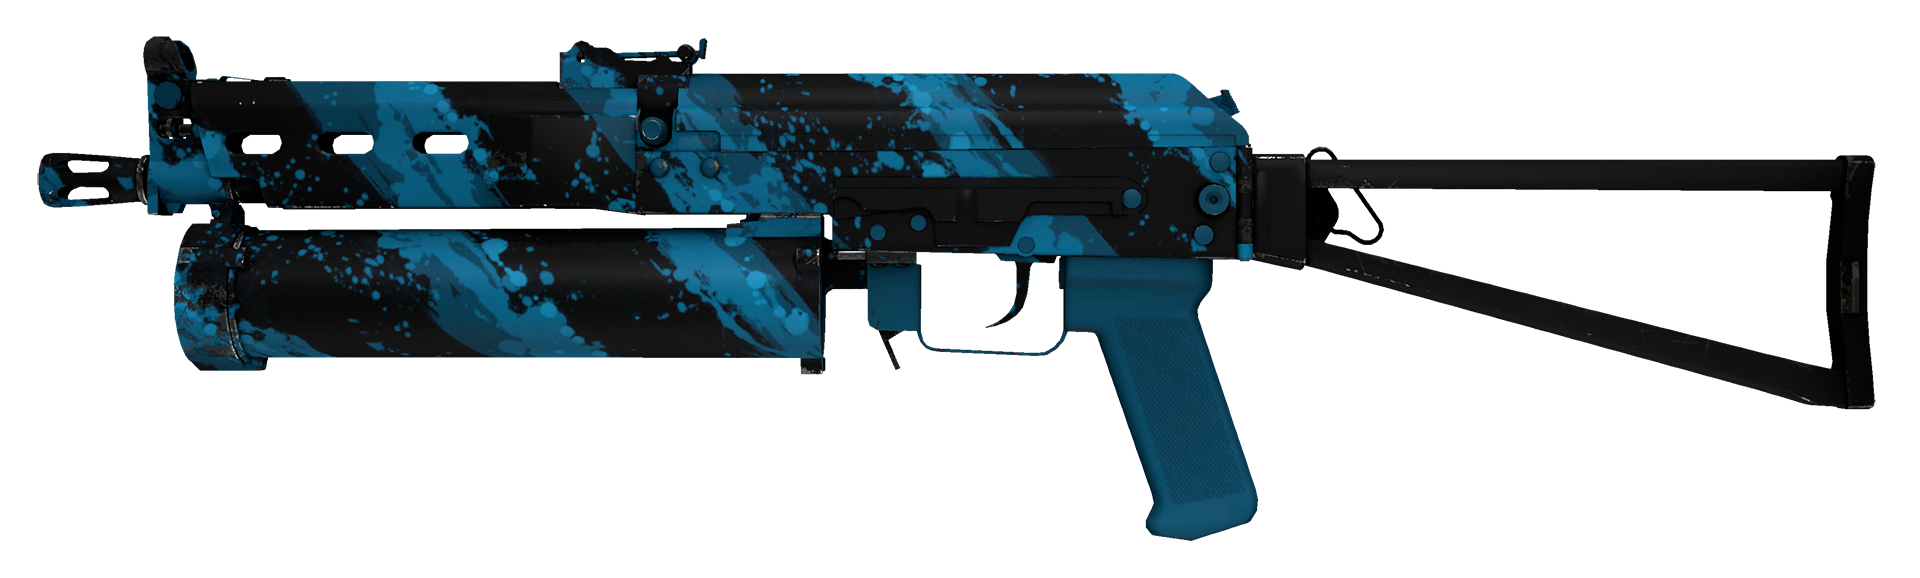 PP-Bizon Sand Dashed cs go skin download the new for windows